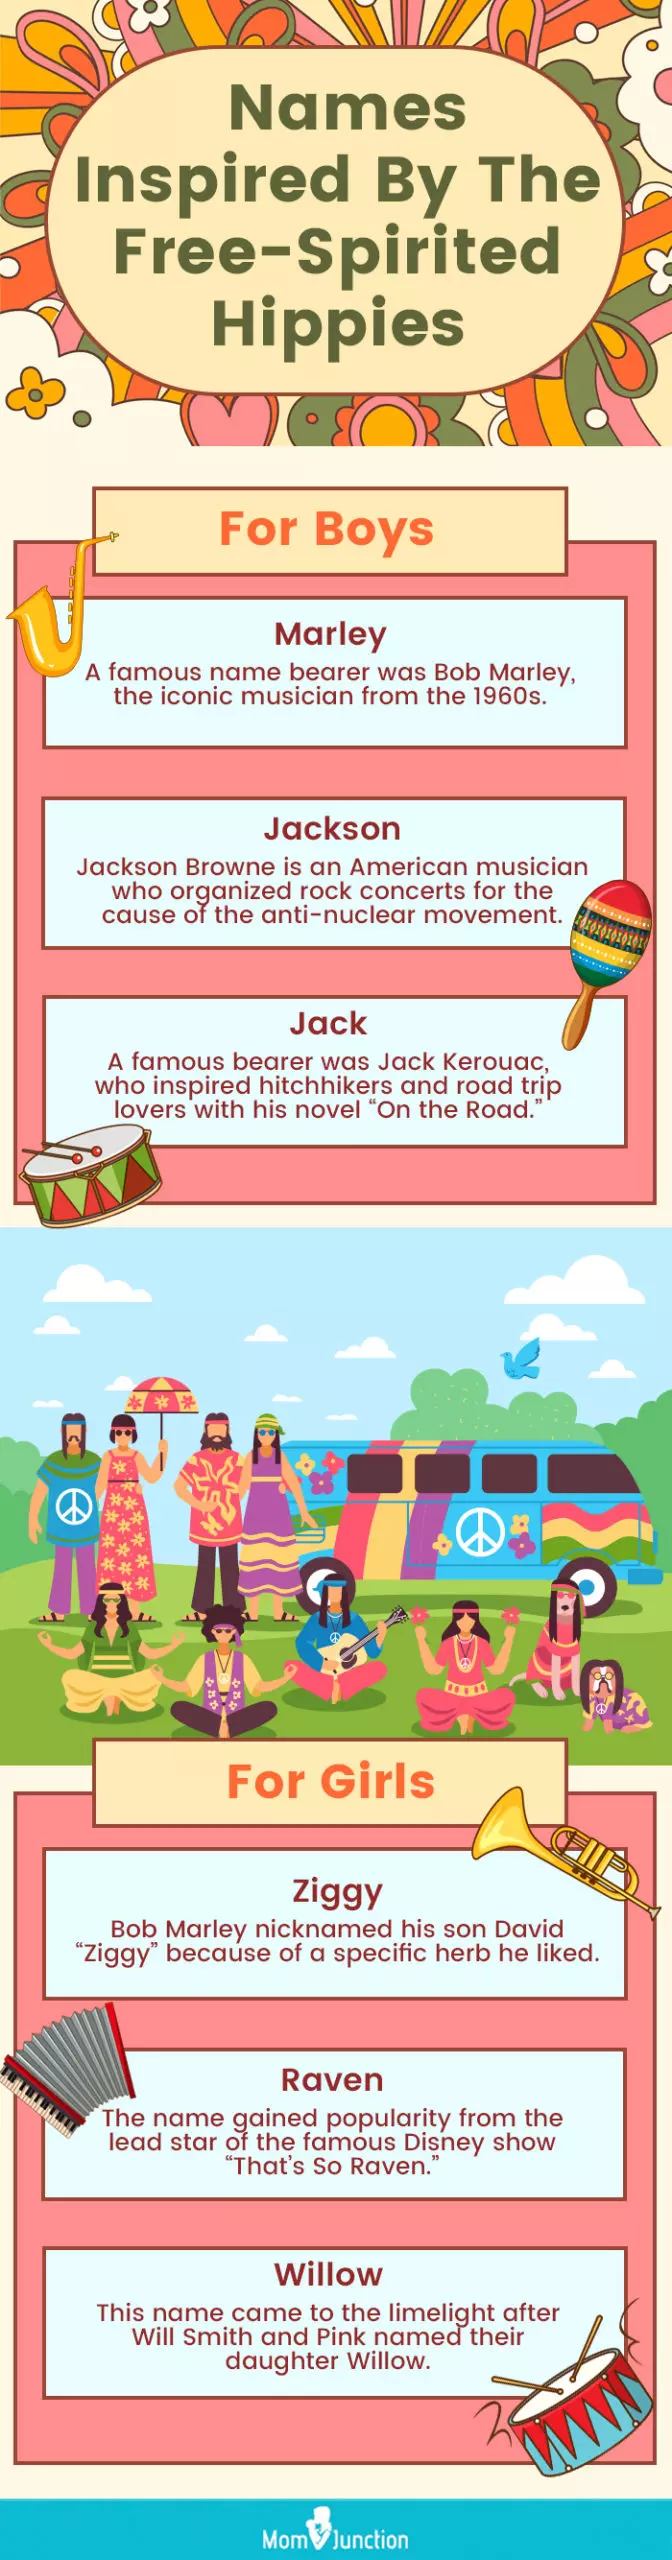 names inspired by the free spirited hippies (infographic)